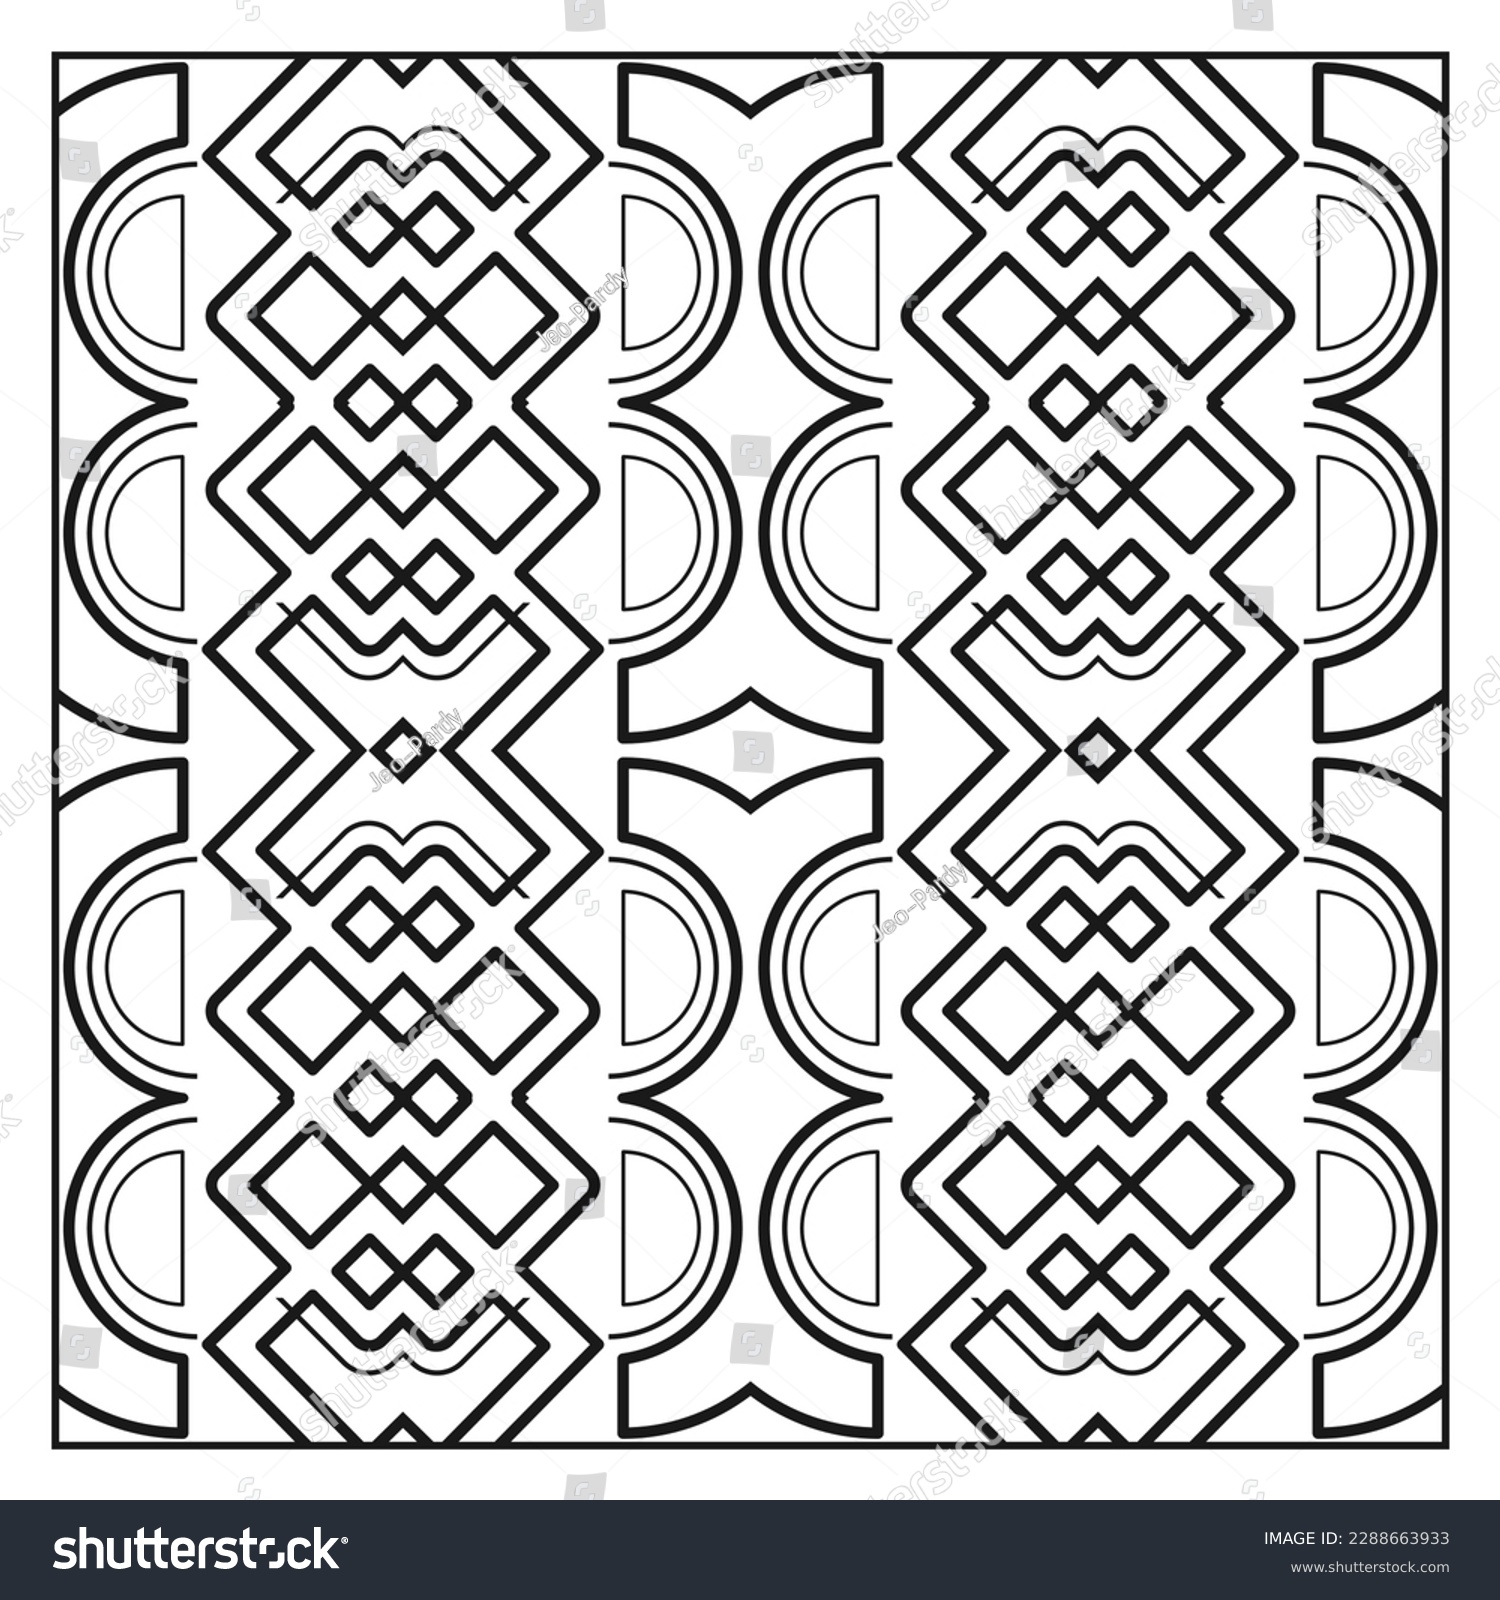 SVG of Fantasy pattern number 4 for coloring. Original ornament. Page for coloring book, title page, seamless pattern. Vector illustration svg